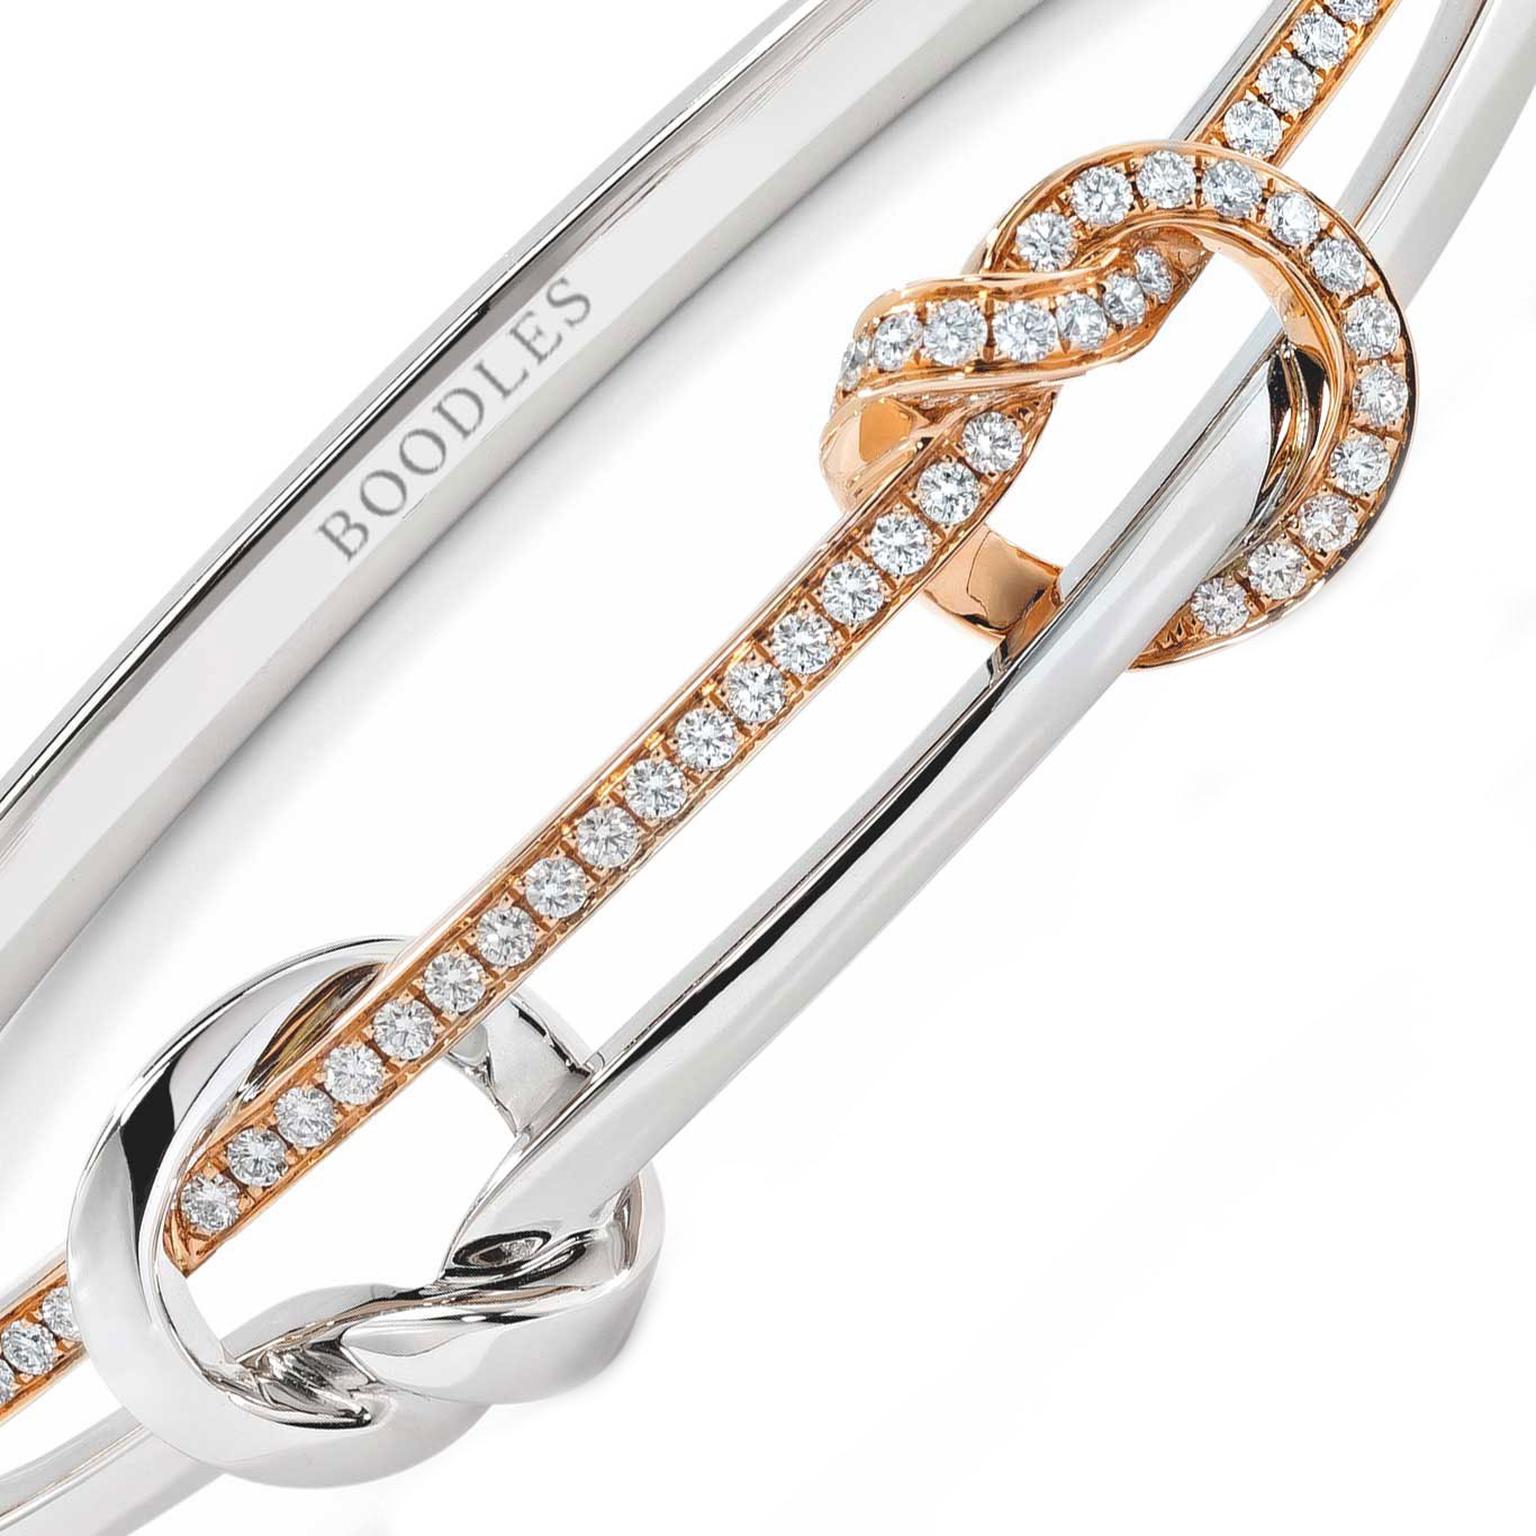 Boodles Knot bracelet in white and rose gold with diamonds